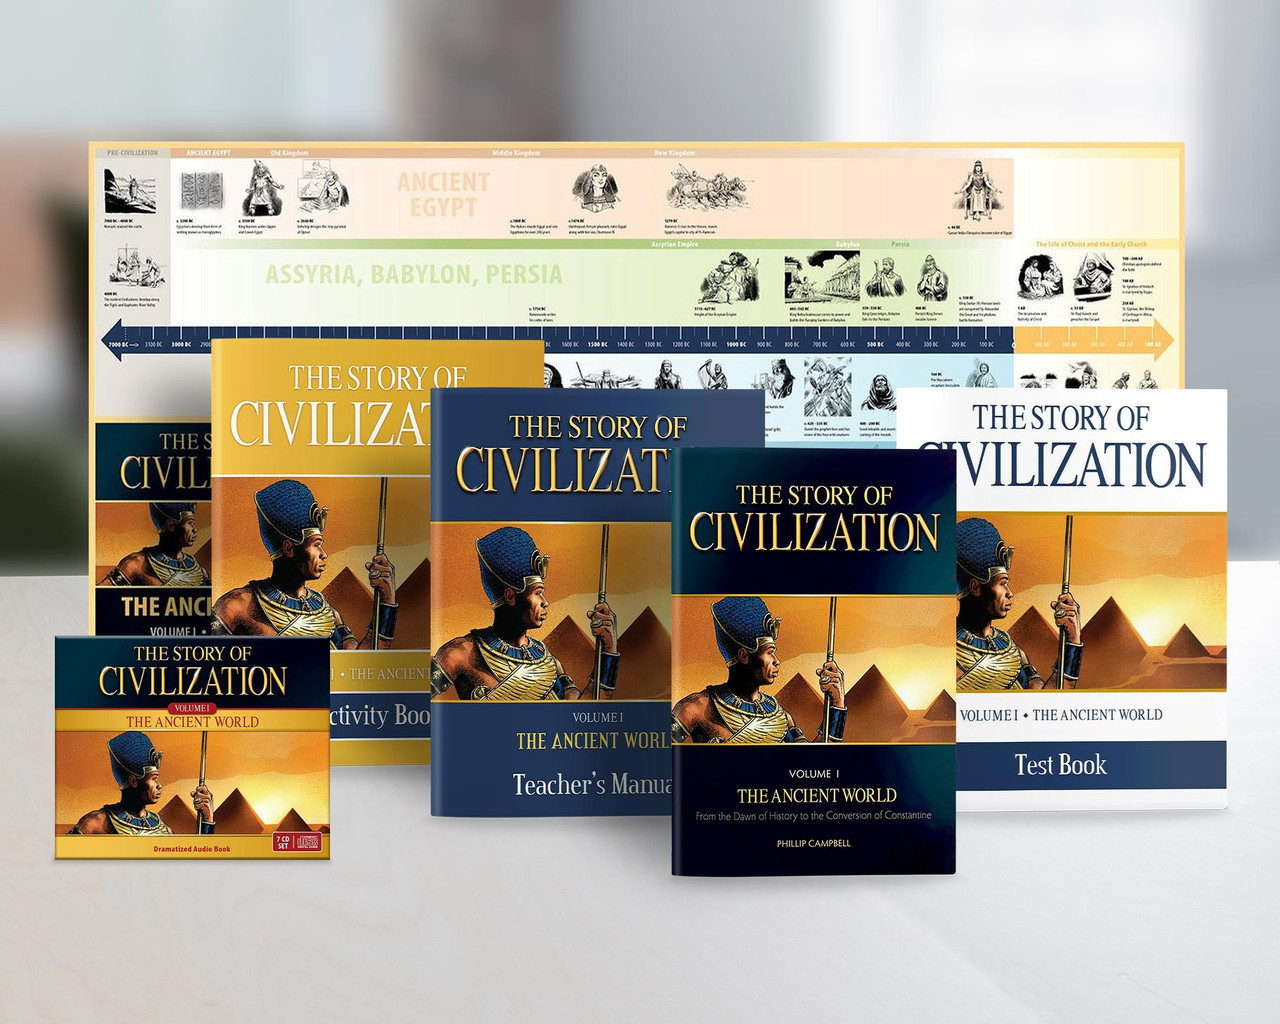 Civilization　of　Story　1:　Volume　(Complete　Ancient　World　The　The　Set)